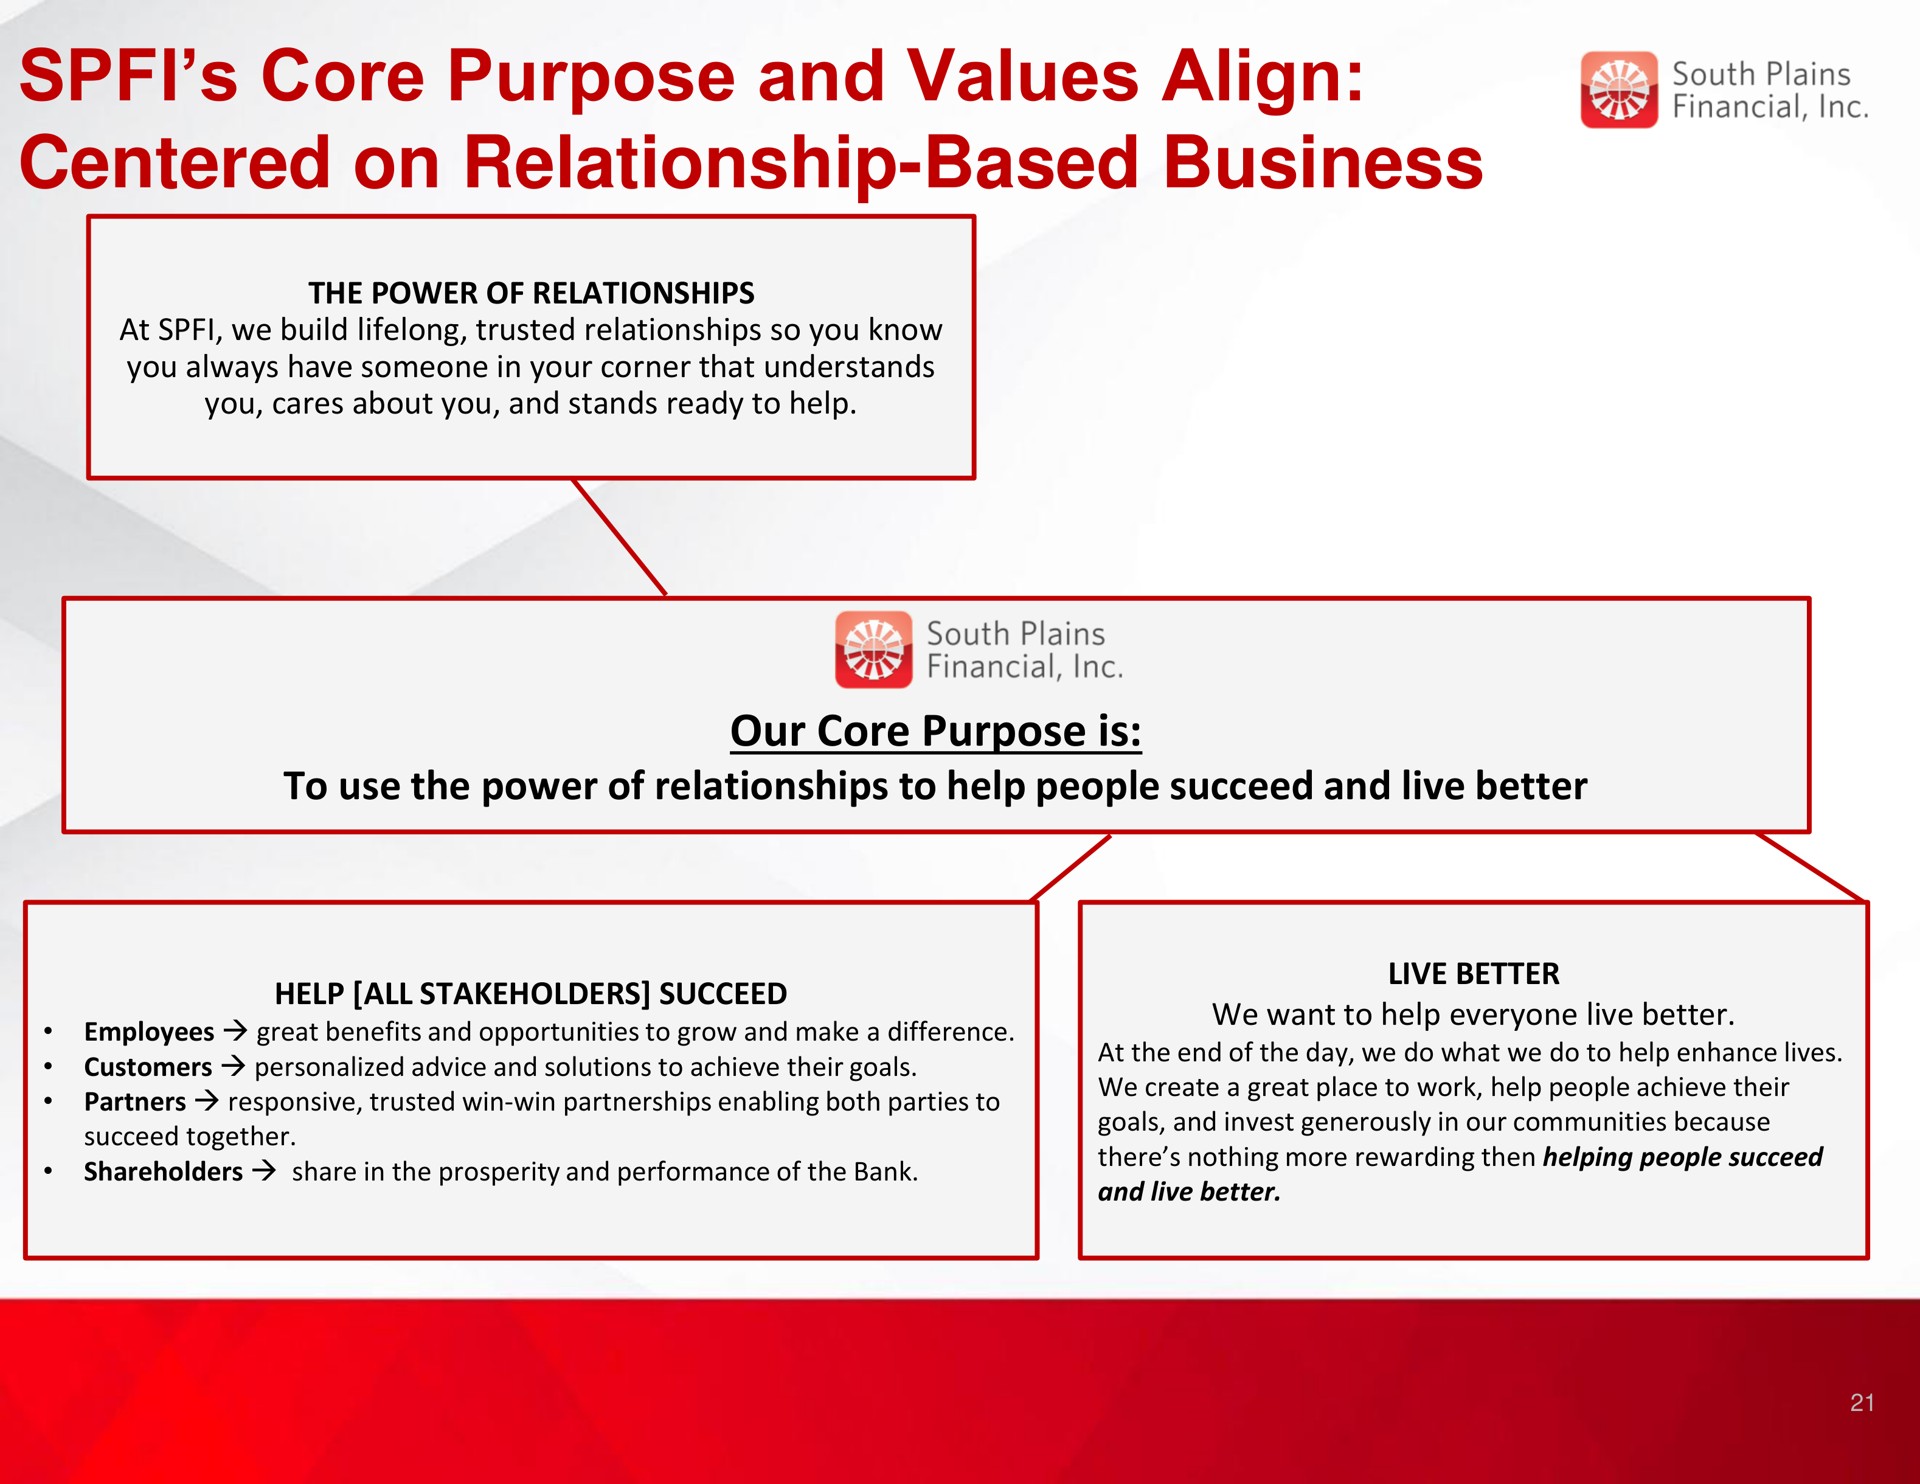 core purpose and values align centered on relationship based business be south plains | South Plains Financial